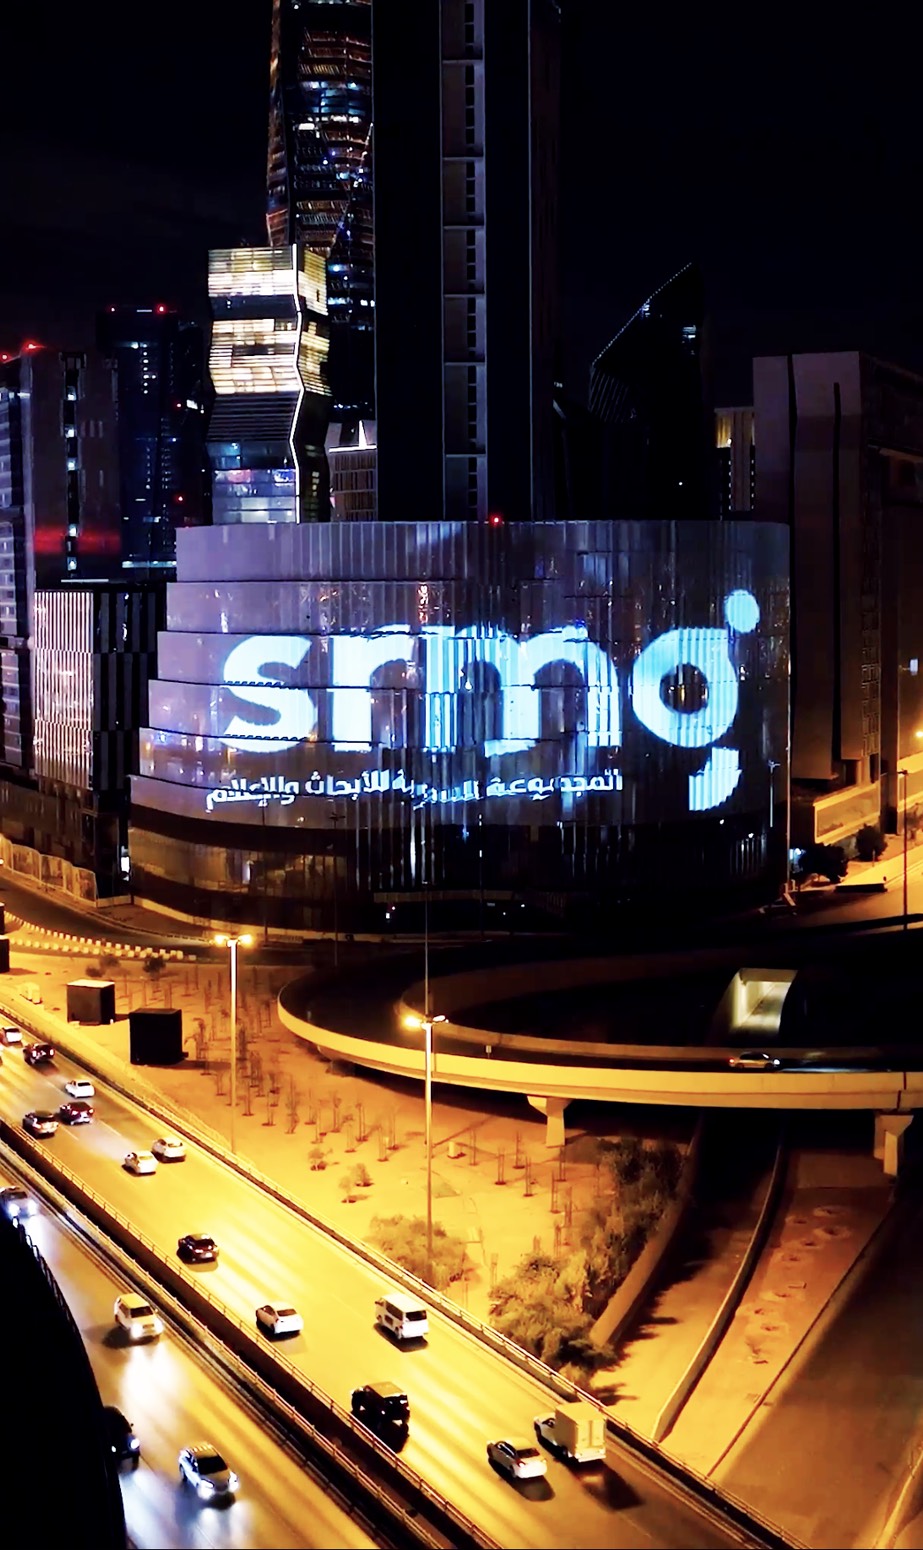 SRMG accelerates its growth and transformation strategy, adopting an exclusively digital approach for Arriyadiyah, AlEqtisadiah and Malayalam News, alongside new editorial appointments